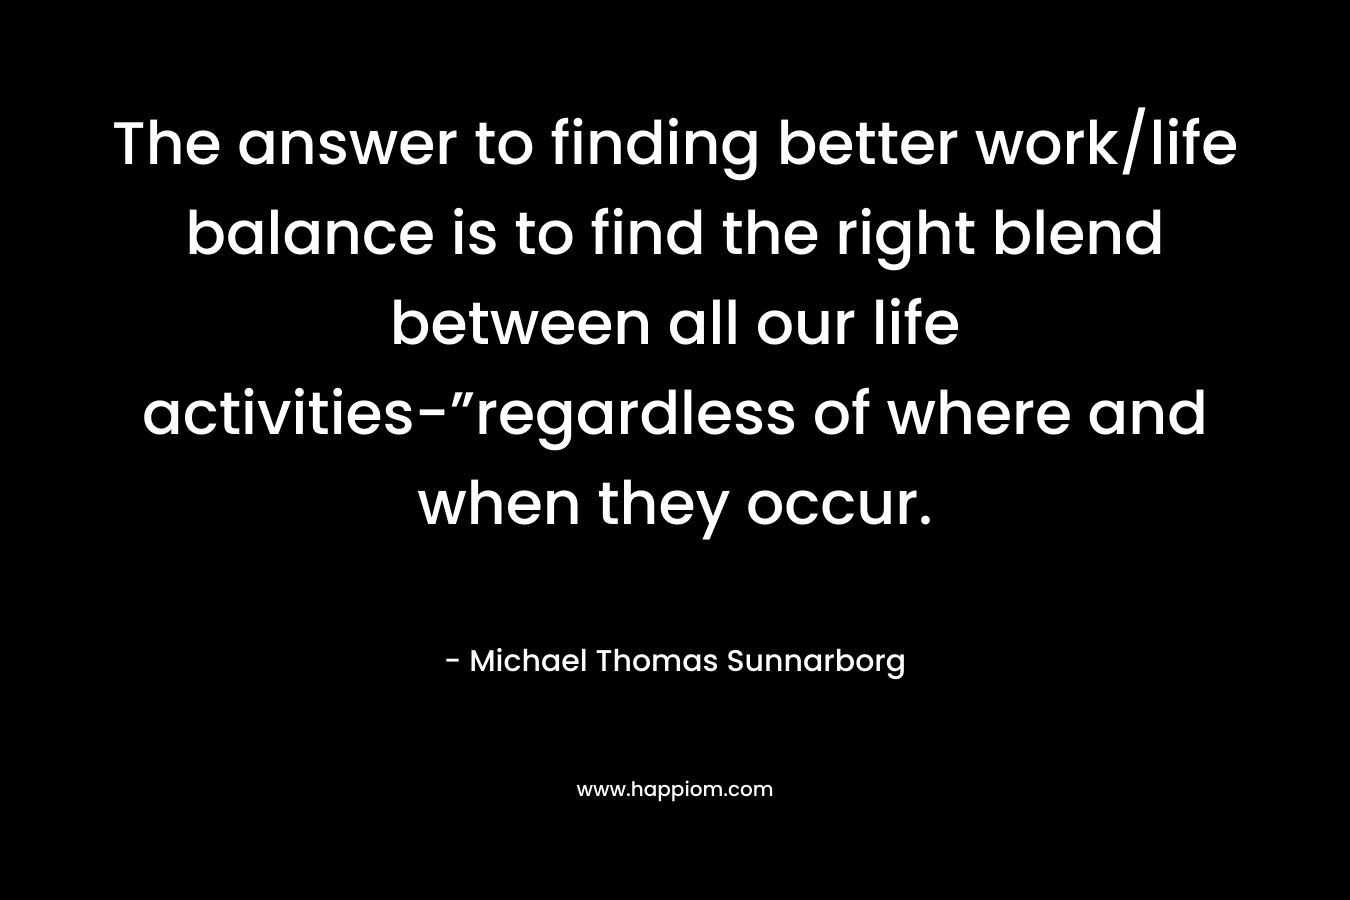 The answer to finding better work/life balance is to find the right blend between all our life activities-”regardless of where and when they occur.